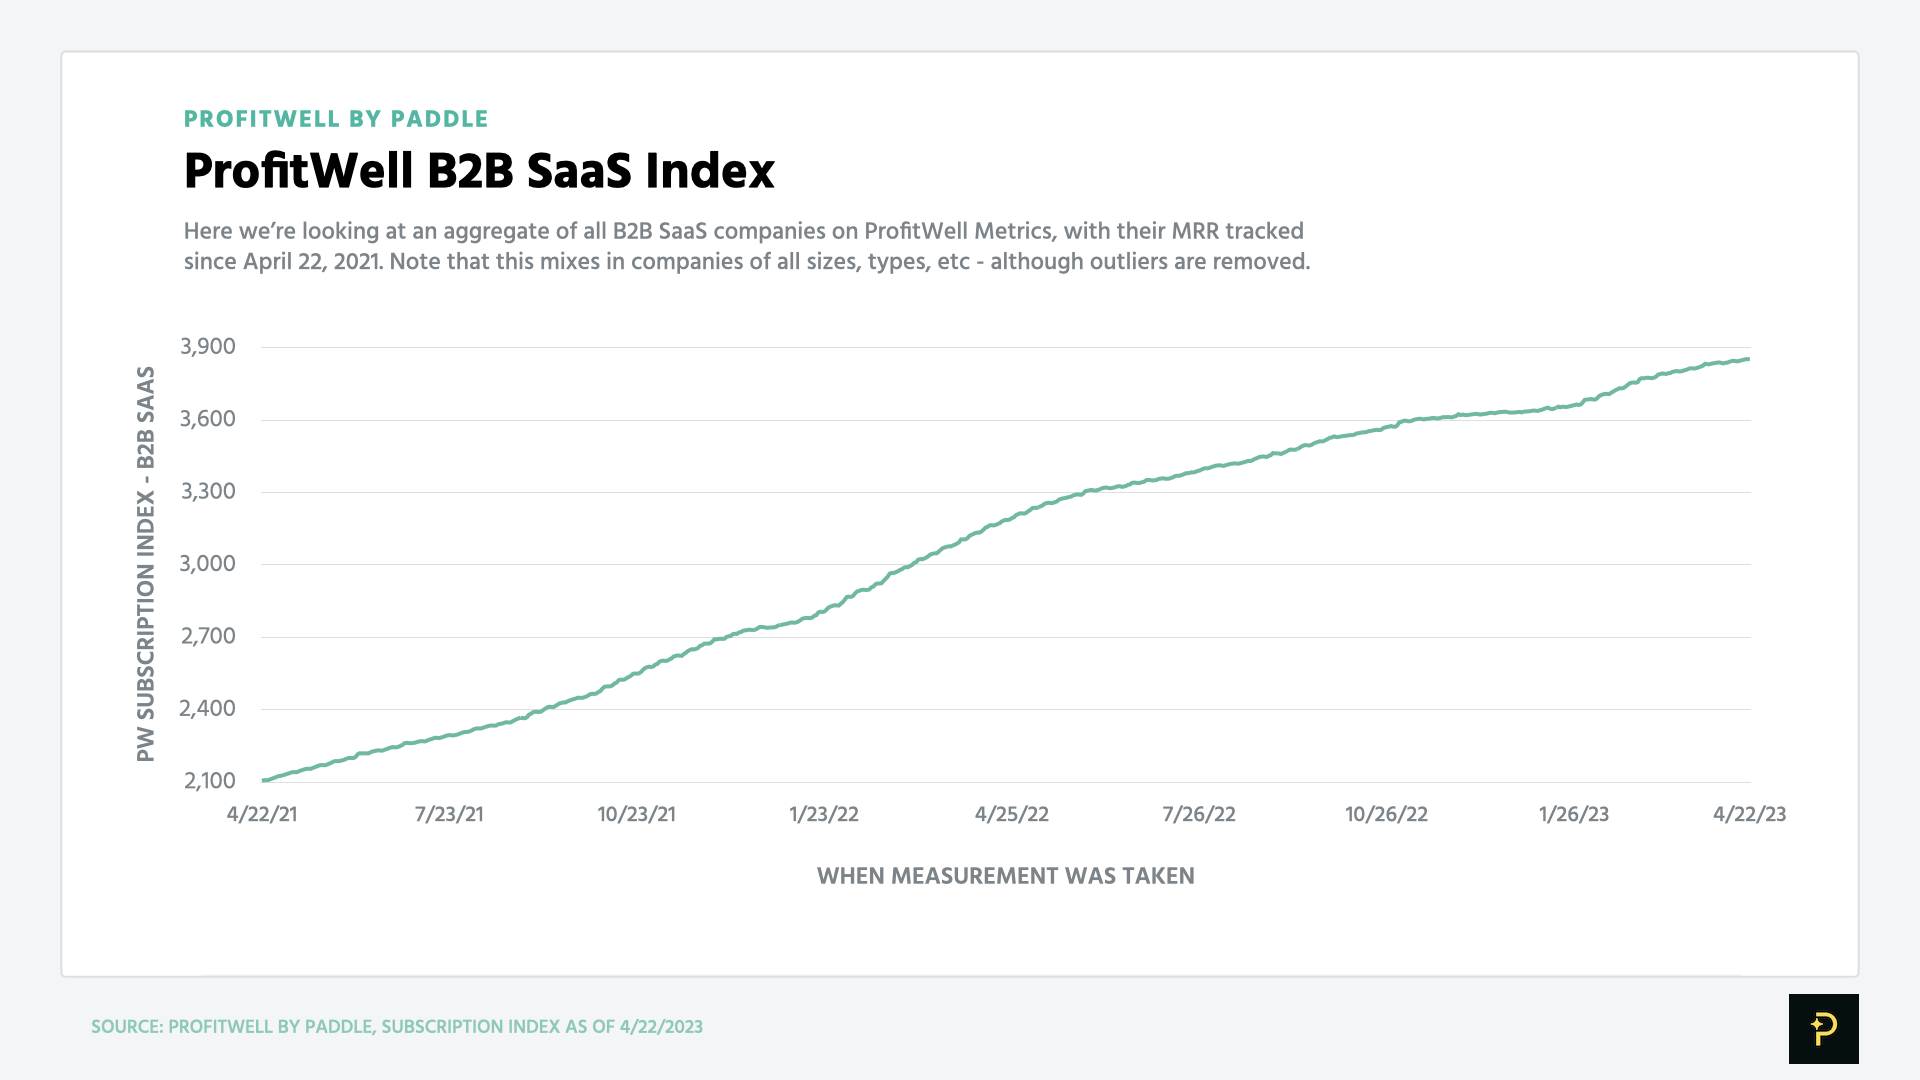 Chart of the ProfitWell B2B SaaS Index, showing slowing growth in April 2023.